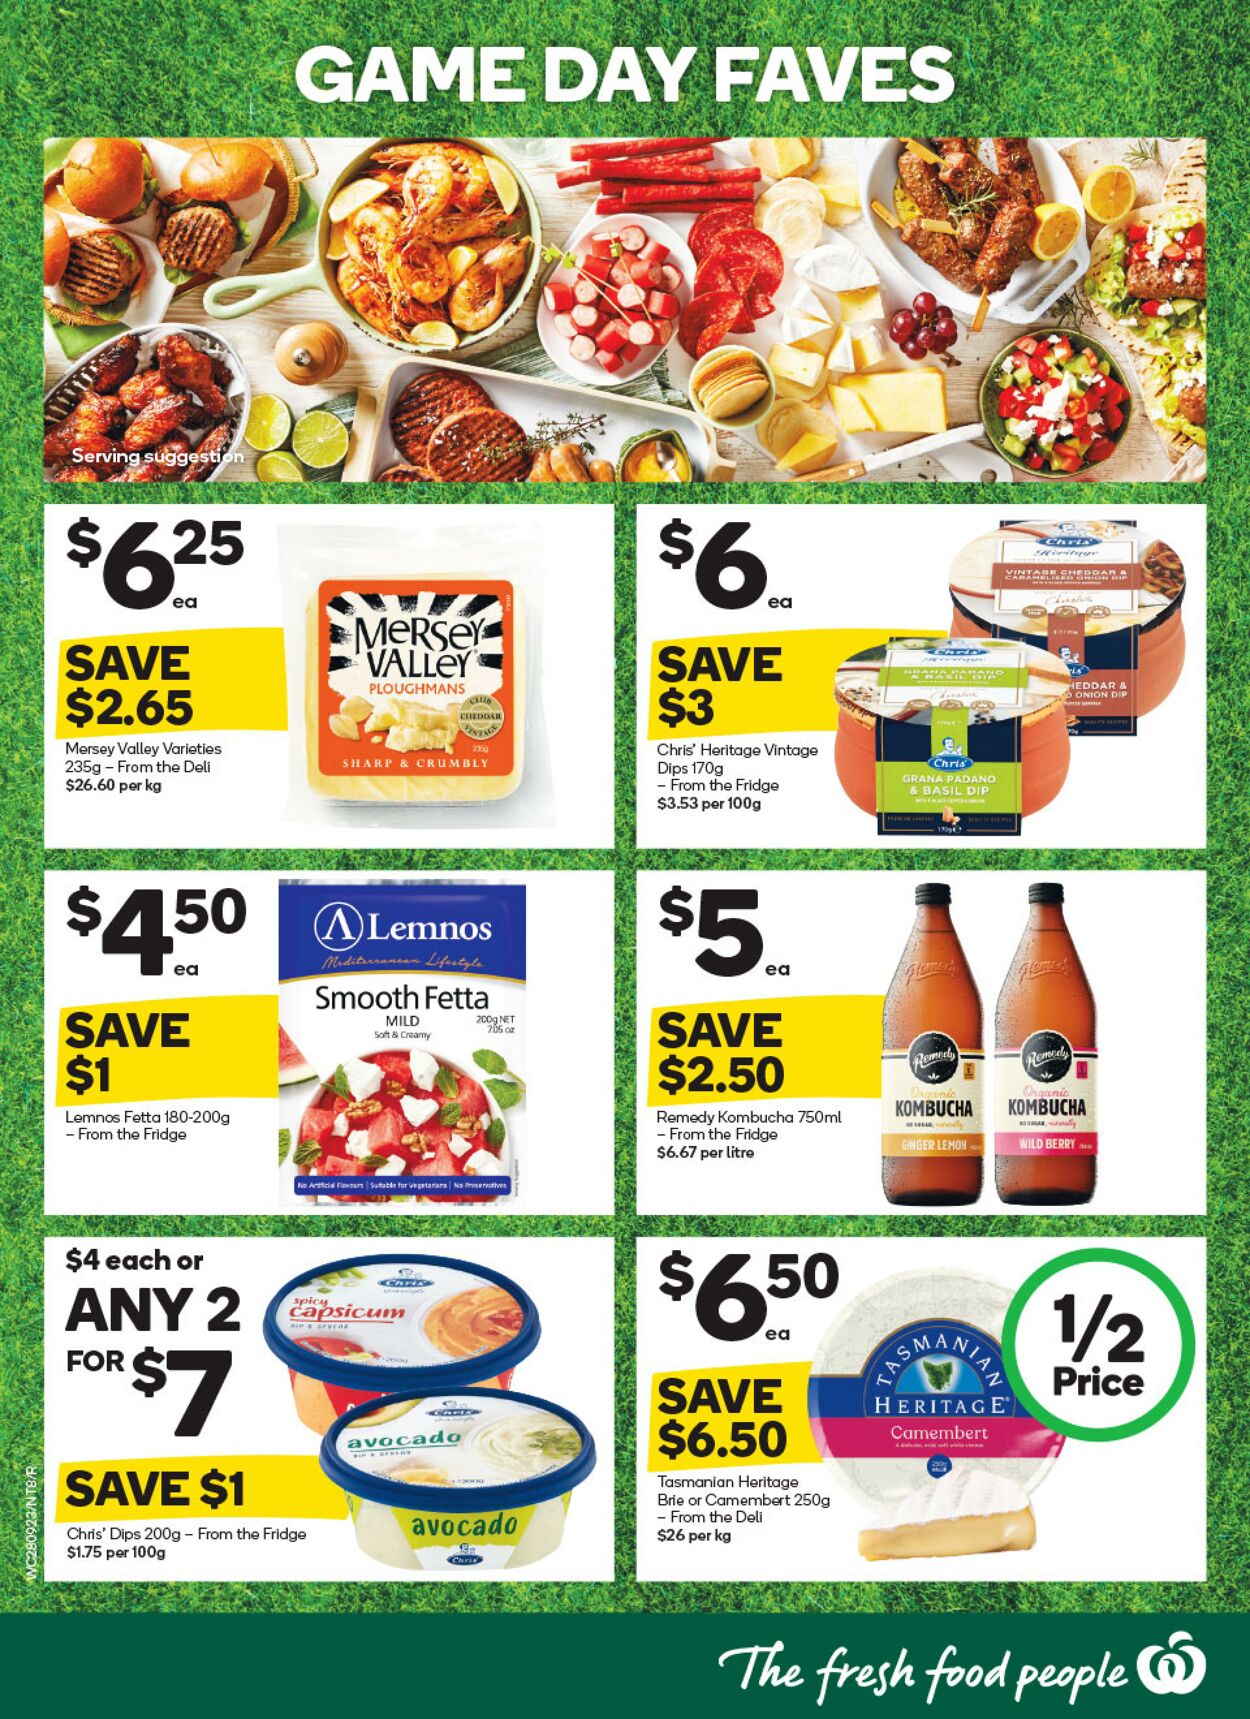 Catalogue Woolworths 28.09.2022 - 04.10.2022